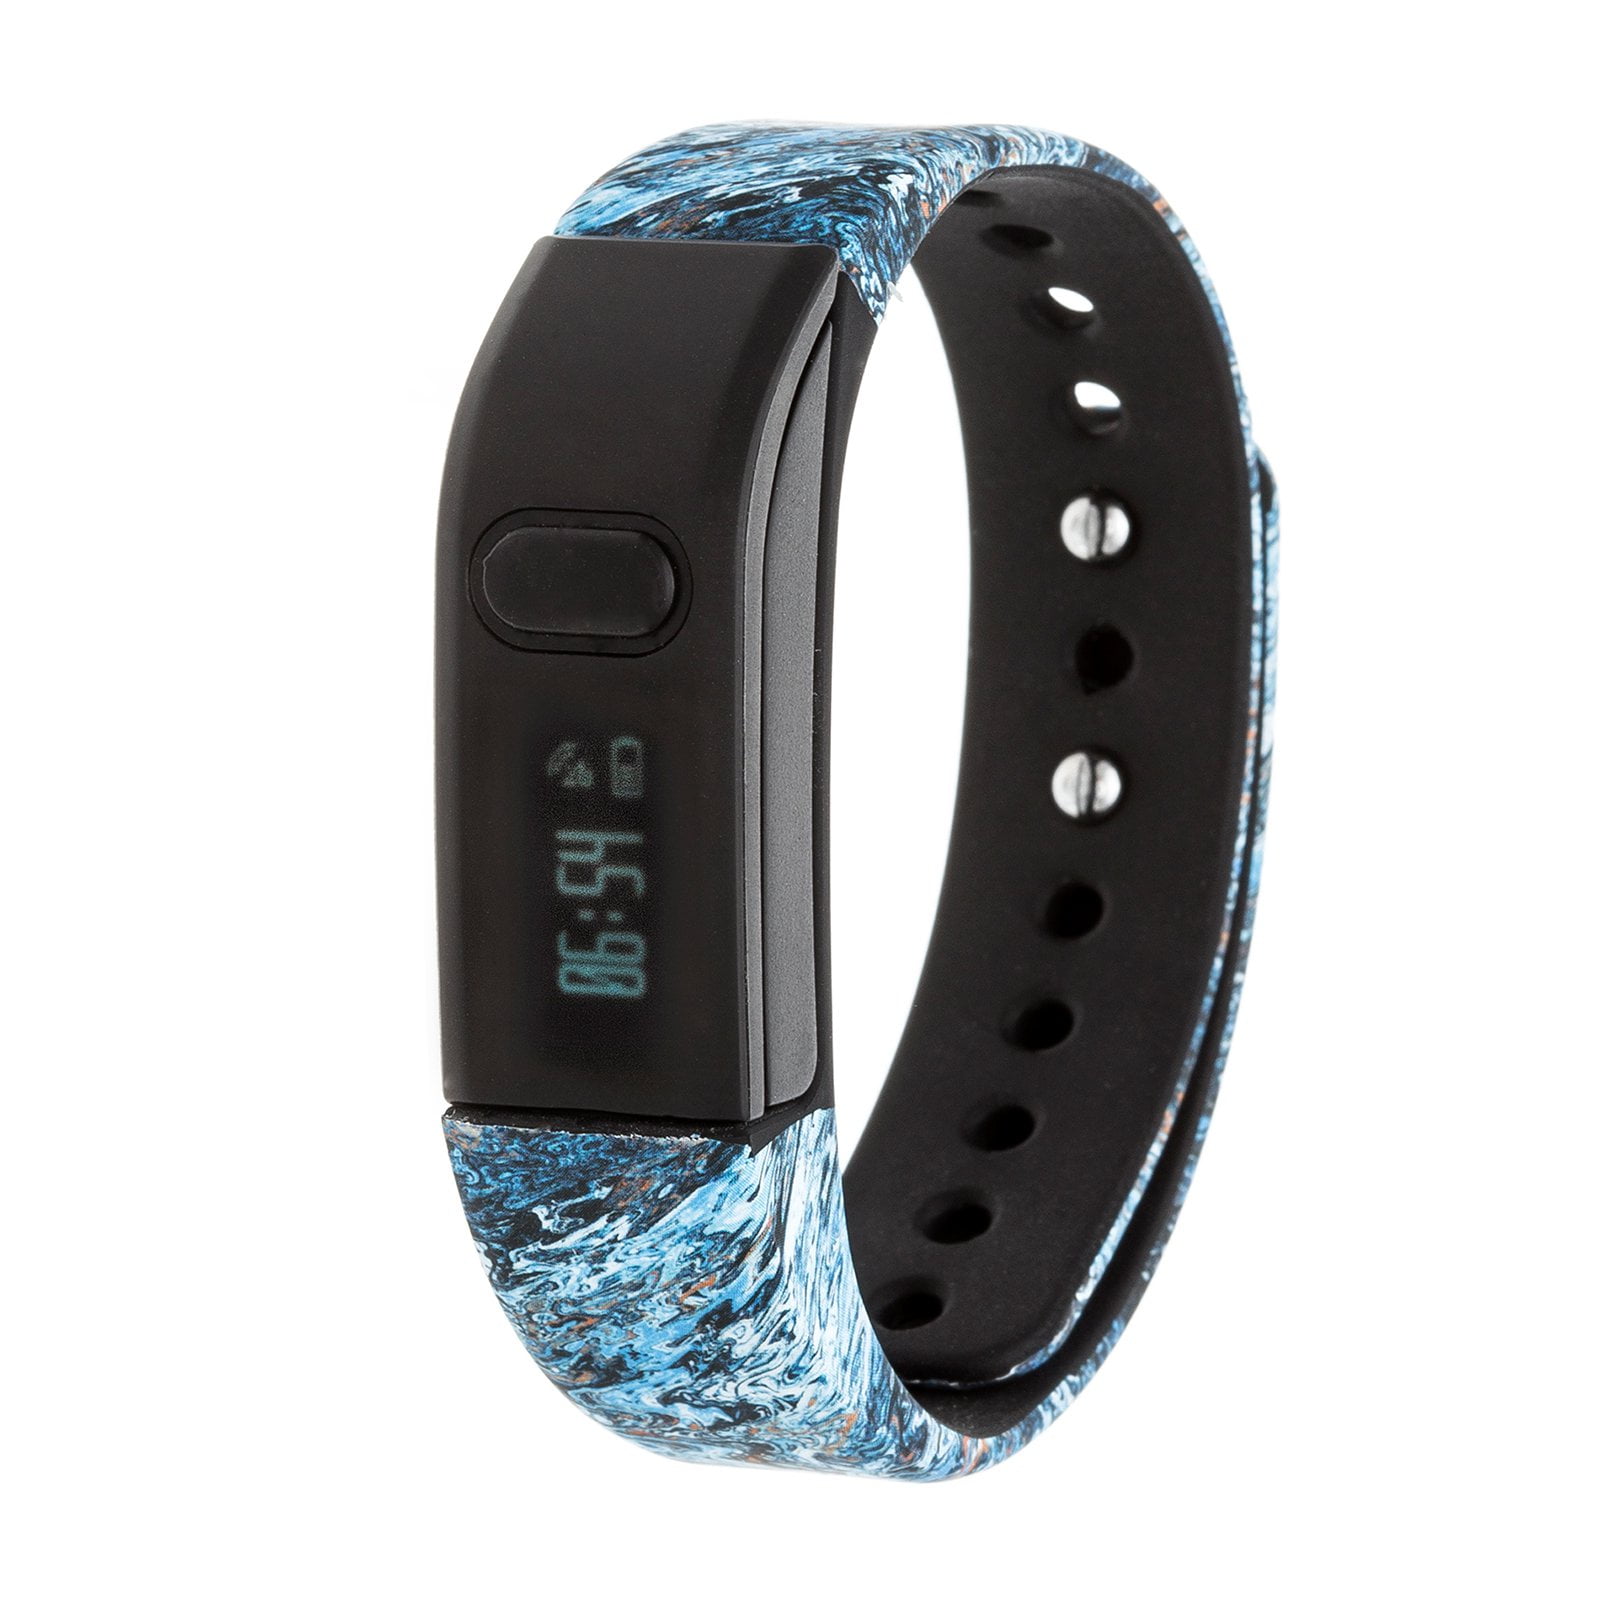 Rbx Printed Activity Tracker With Caller Id And Notification Preview Multiple Colors Available Brickseek - rbx multiple